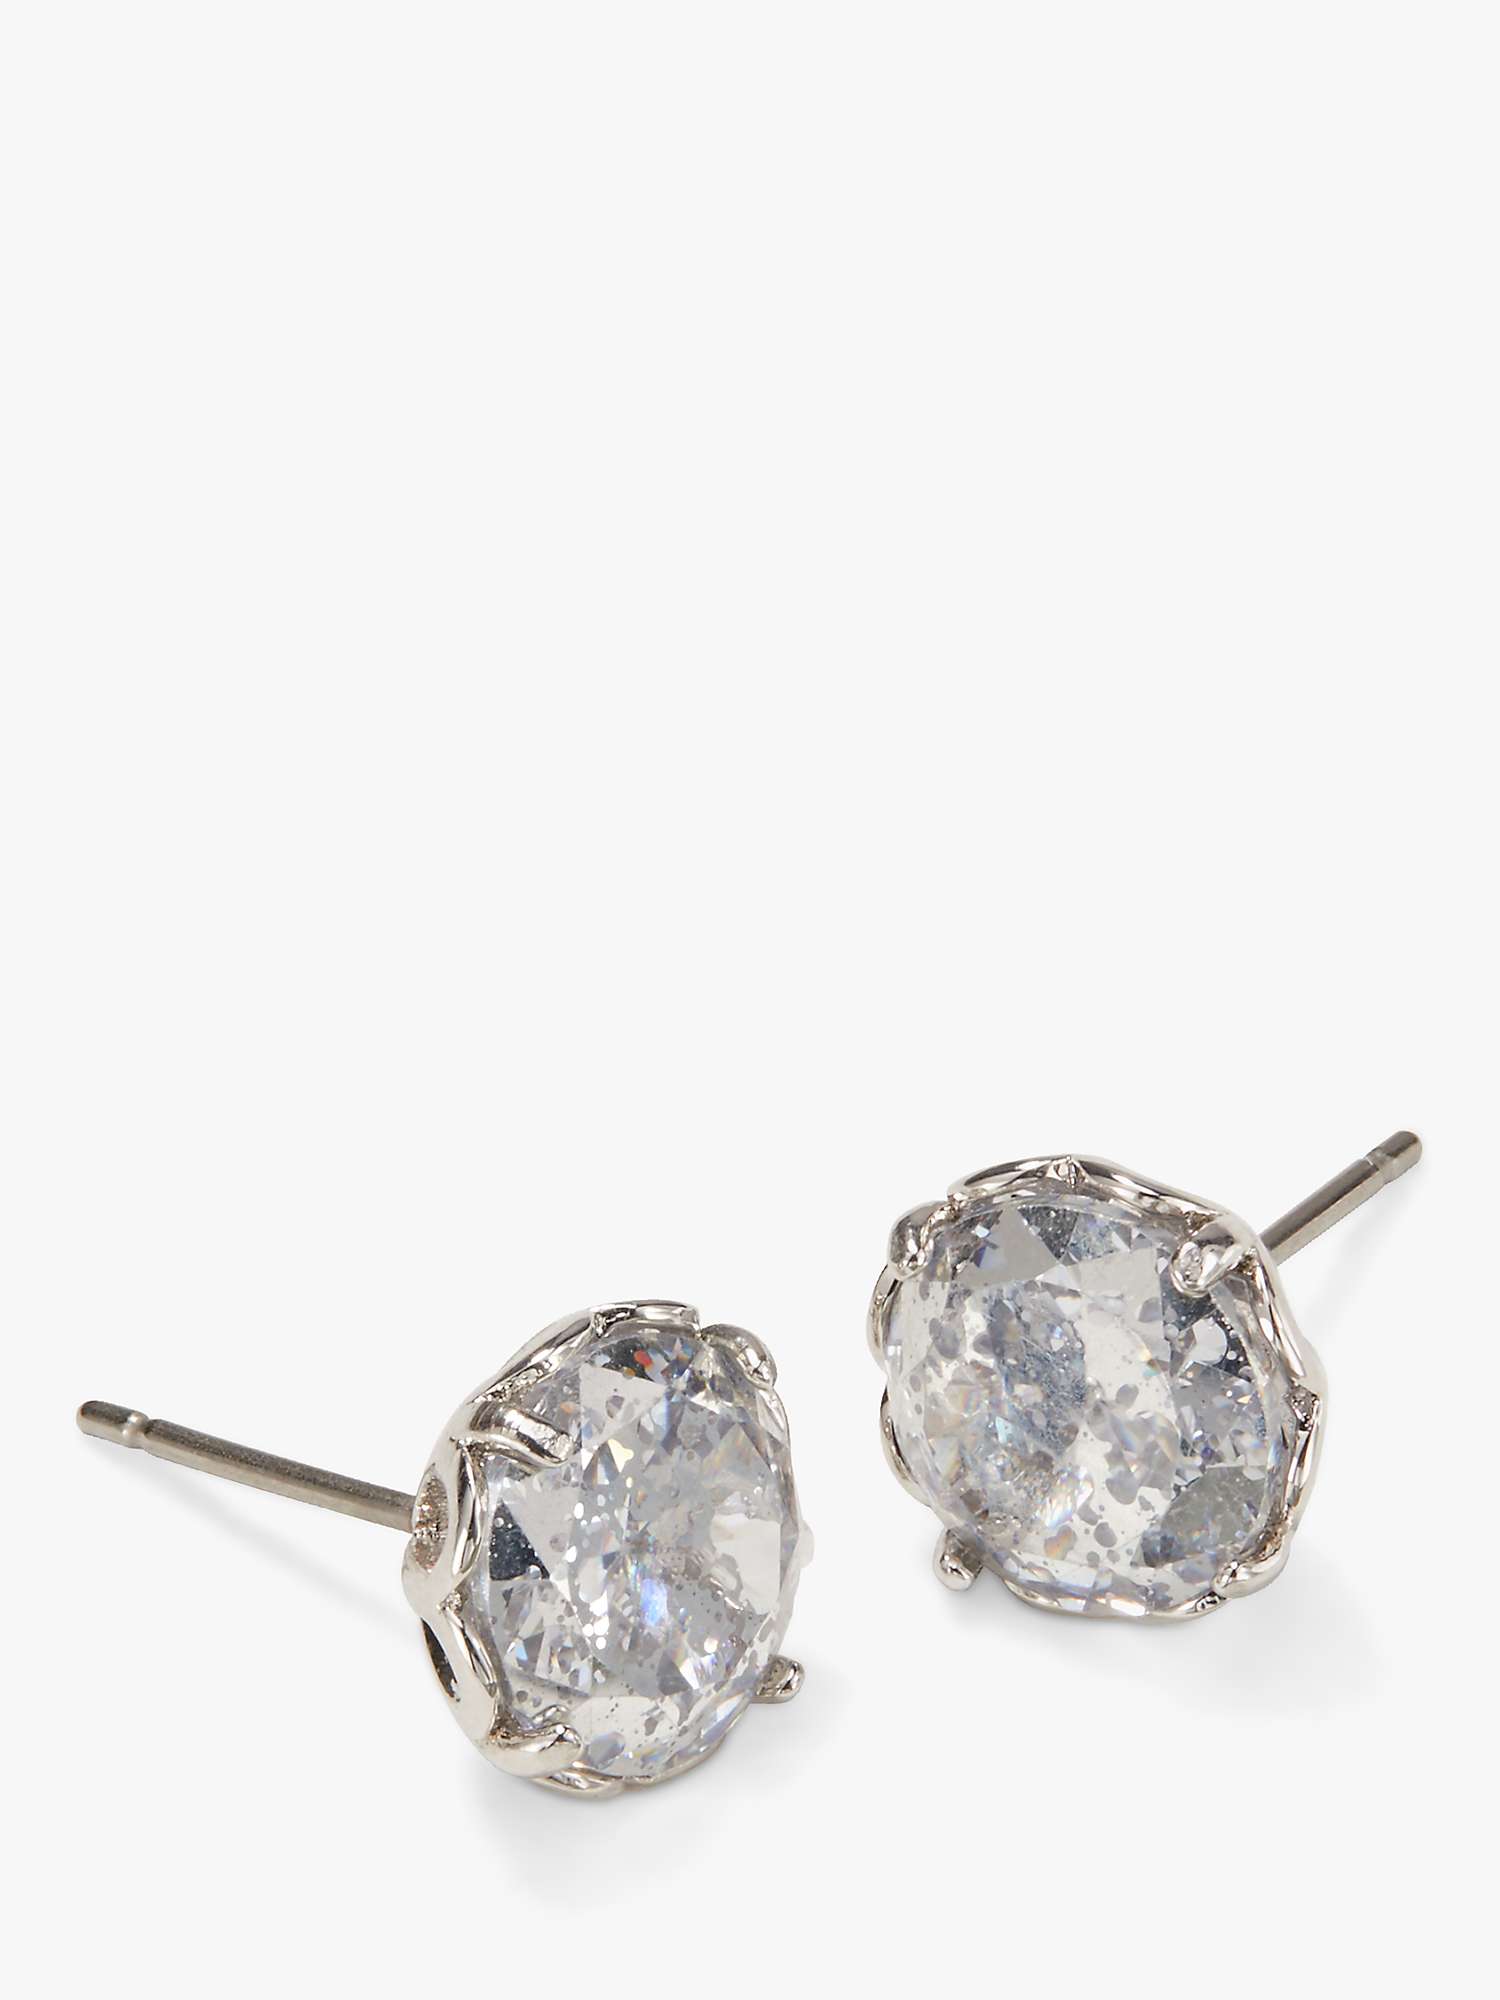 kate spade new york That Sparkle Cubic Zirconia Stud Earrings, Silver/Clear  at John Lewis & Partners